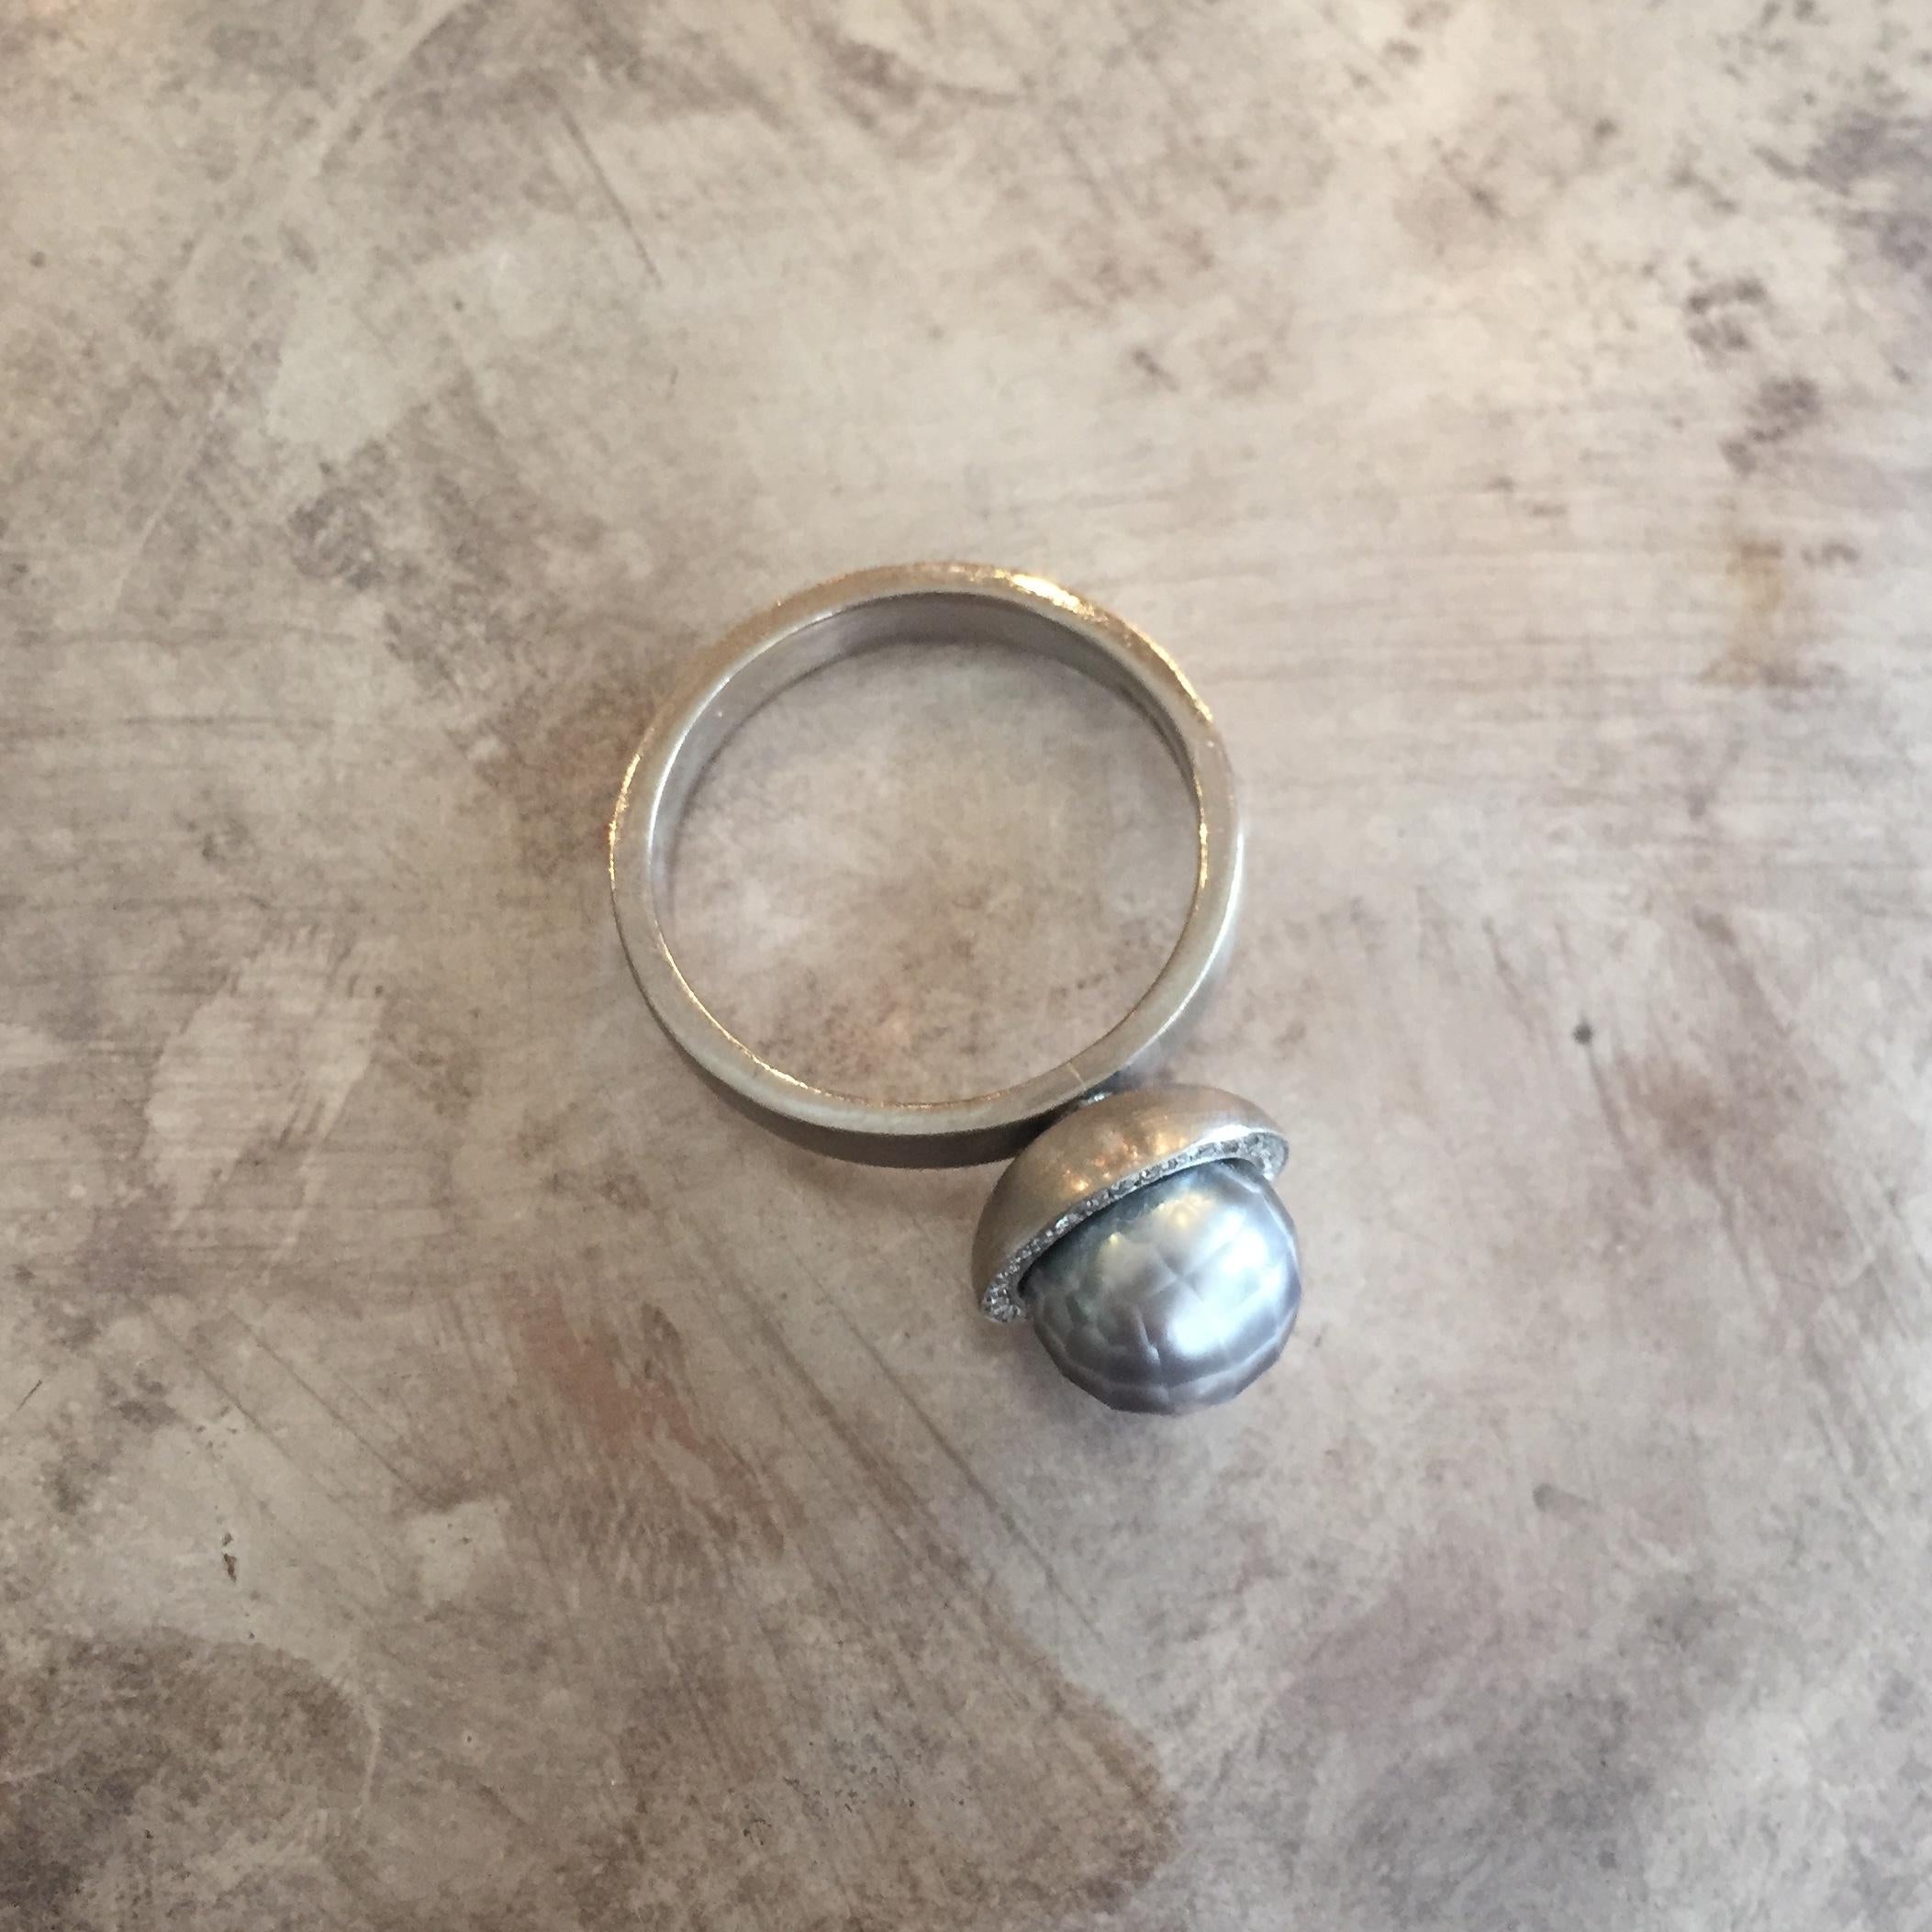 A very unique ring by Sweet Pea, made in 18k white gold. A halo of white diamonds with a total weight of 0.05ct encircles the cool grey faceted pearl. The band is 3mm wide and the pearl is 8mm diameter. This ring is a UK size M, but can be made in